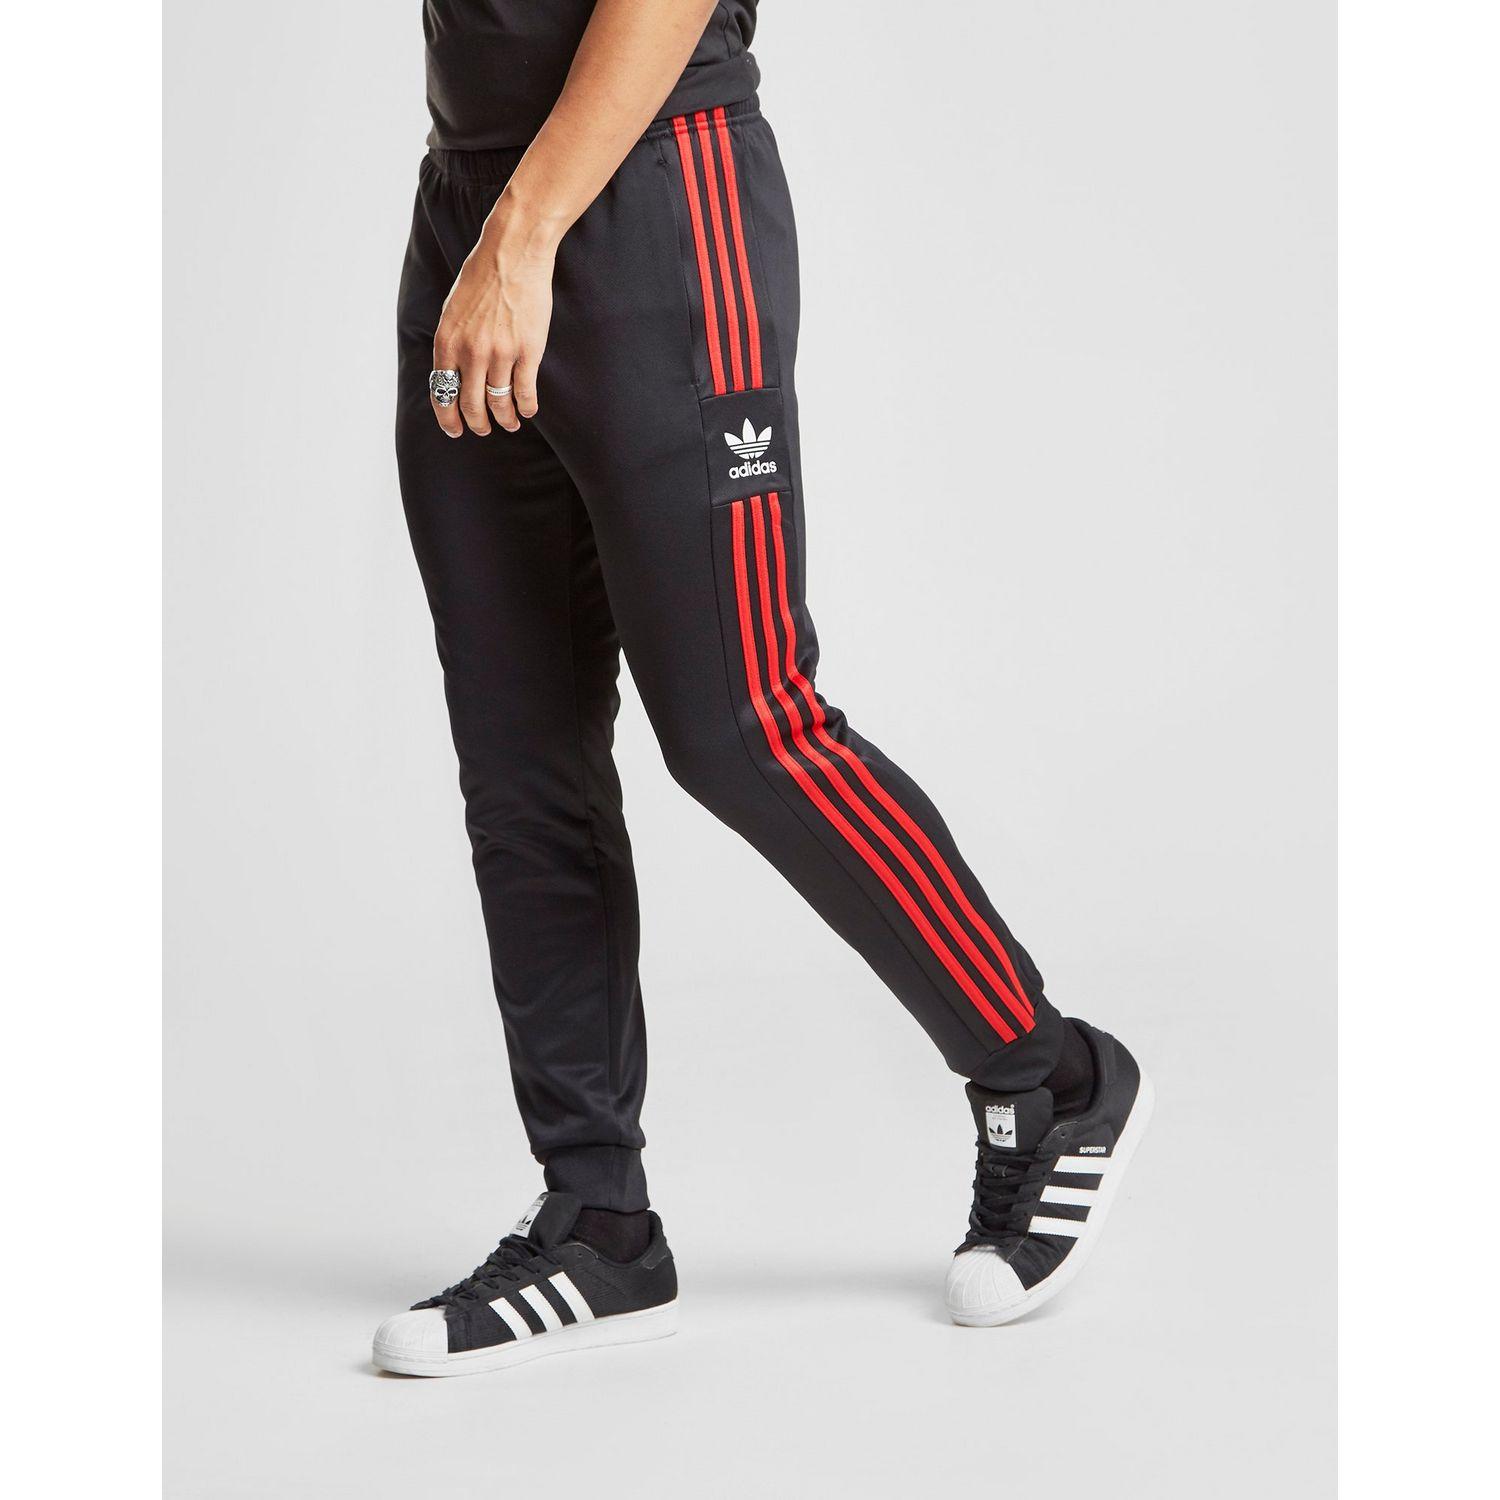 black and red adidas track pants